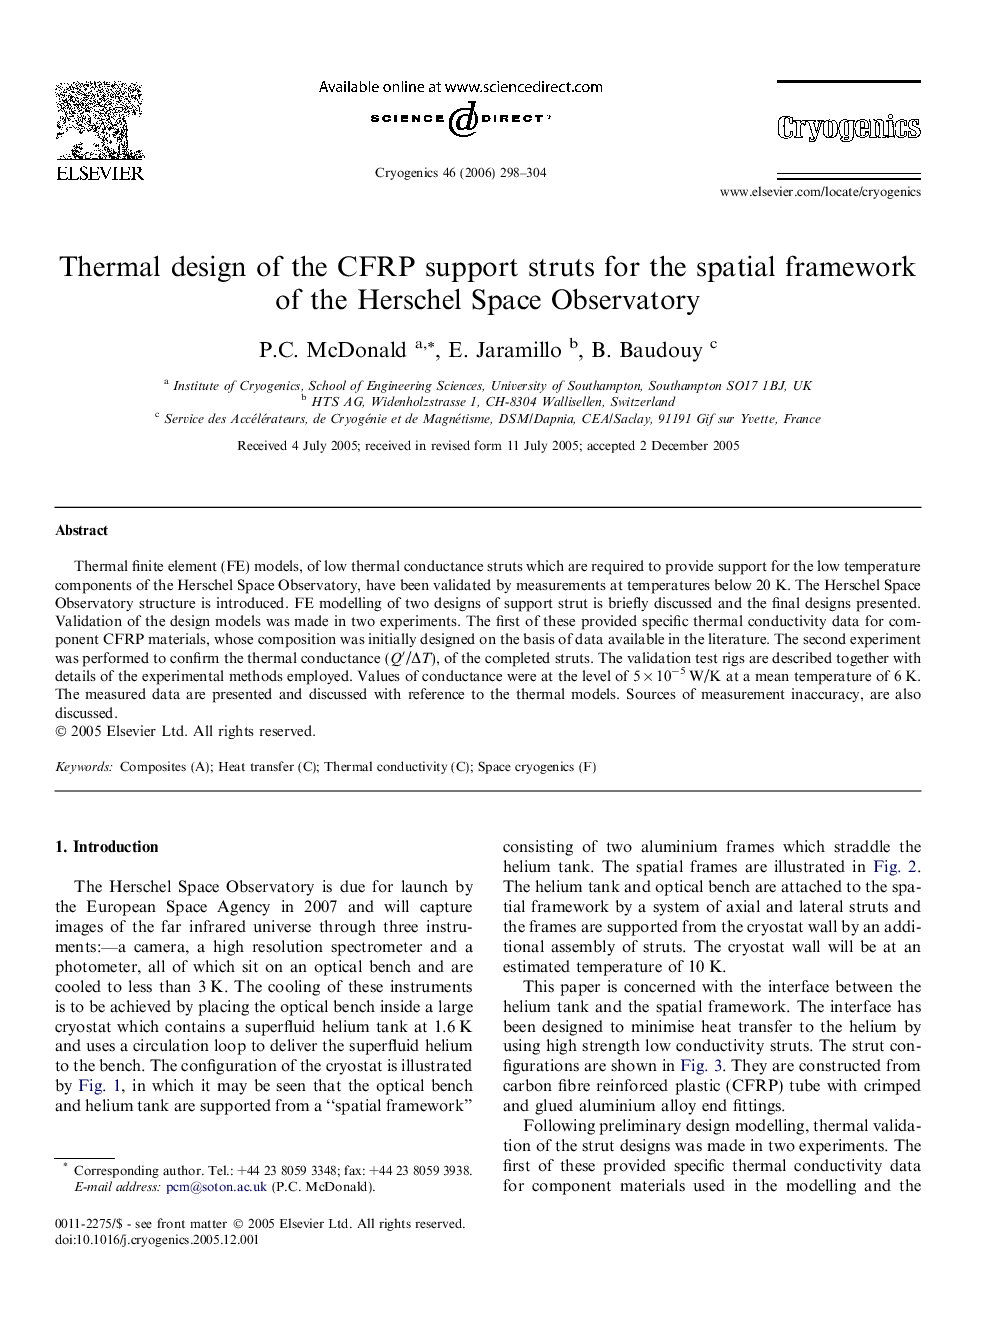 Thermal design of the CFRP support struts for the spatial framework of the Herschel Space Observatory